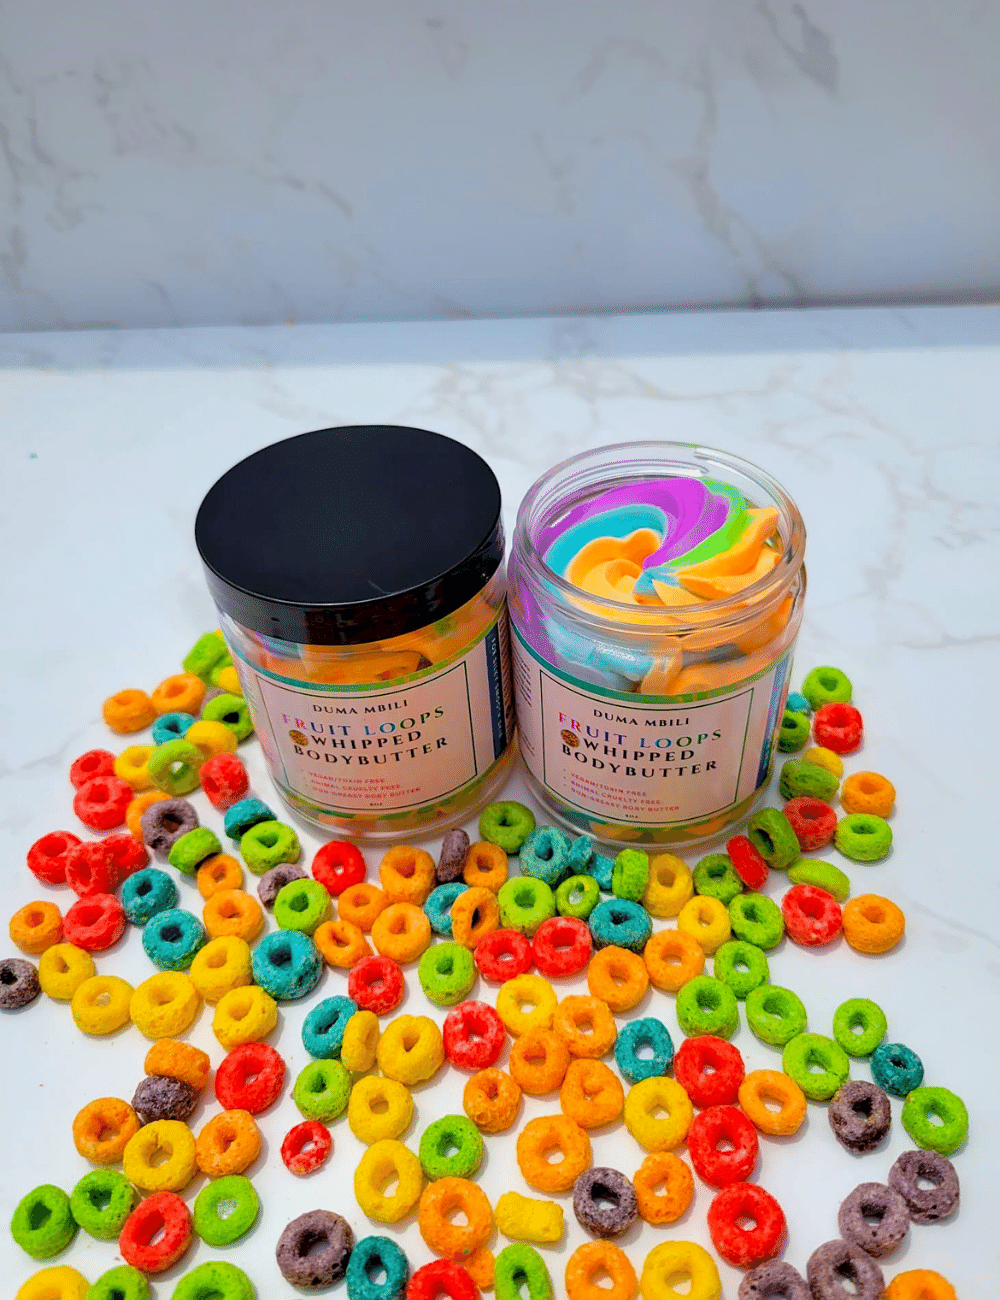 Fruit Loops Lotion with Mango and Shea Butters